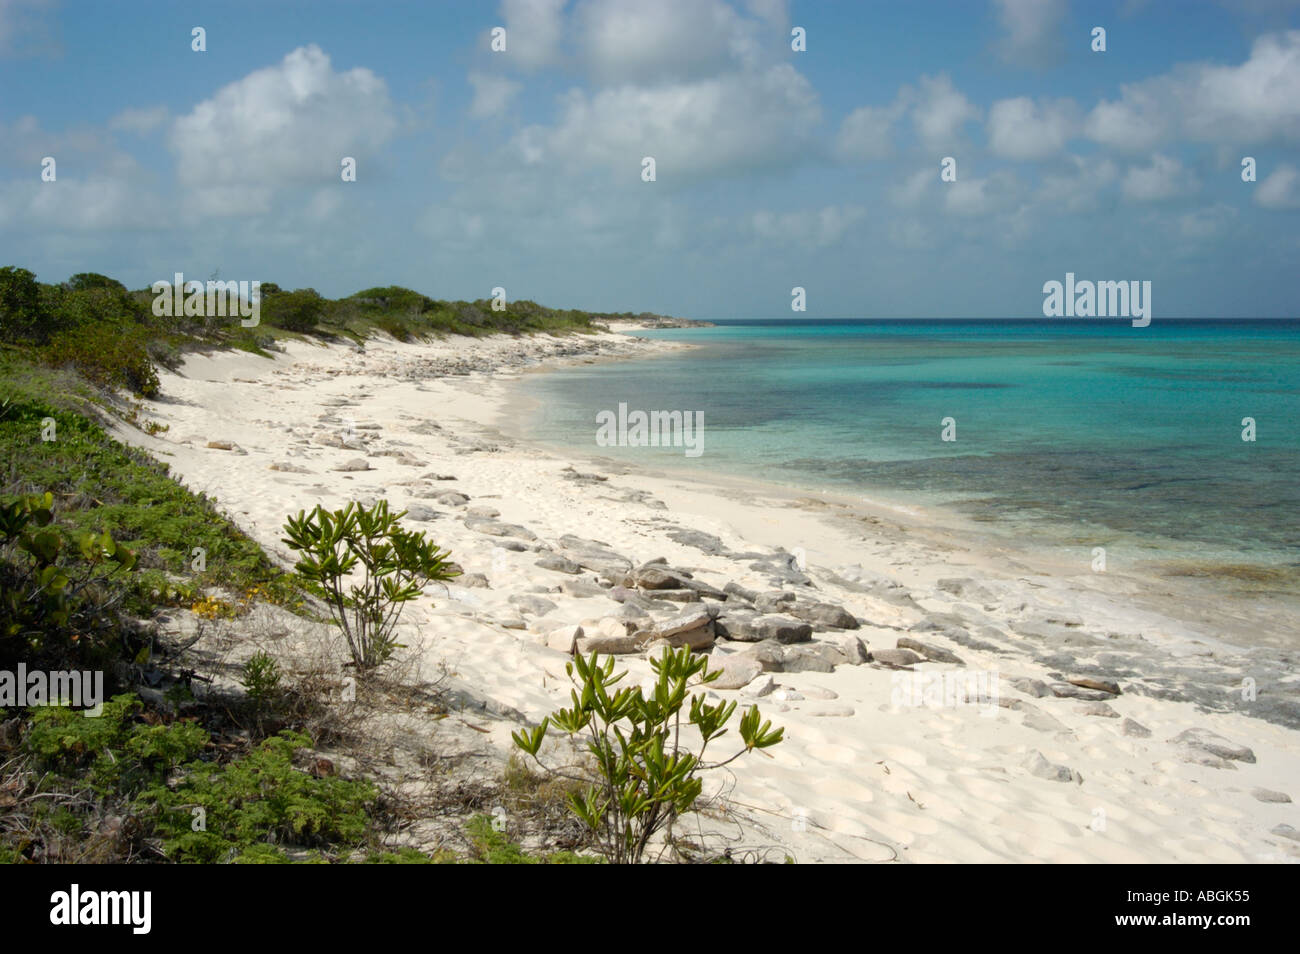 Northwest Point Marine National Park Providenciales Insel Turks And Caicos Islands British West Indies Caribbean Stockfoto